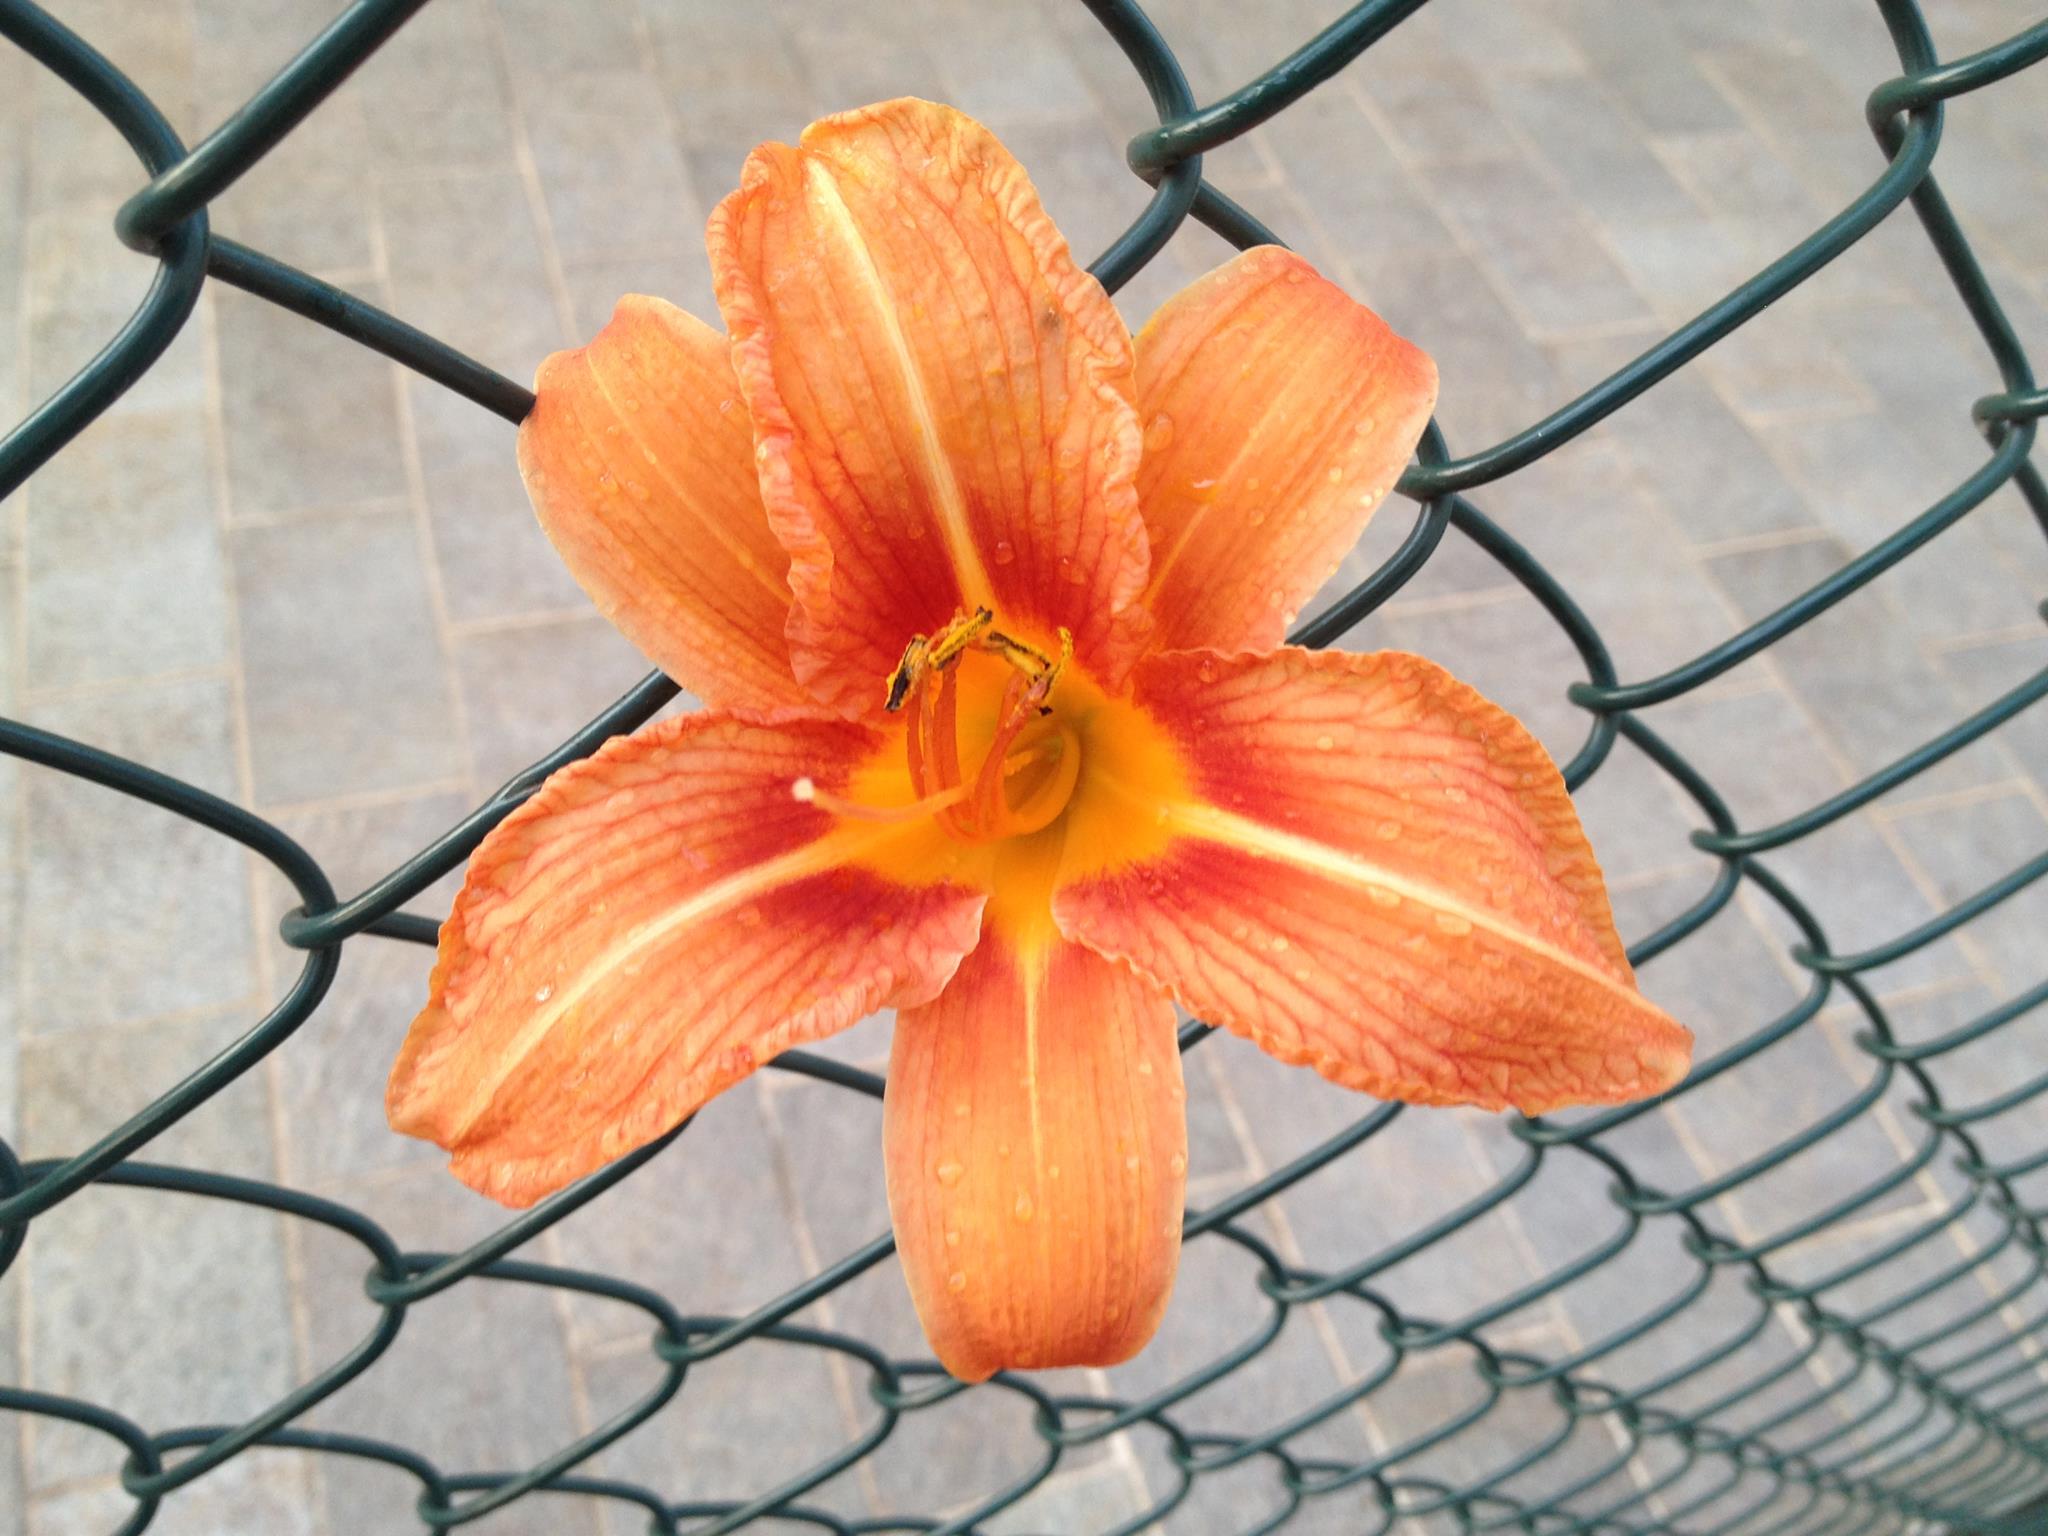 Wild lily imprisoned in a fence...